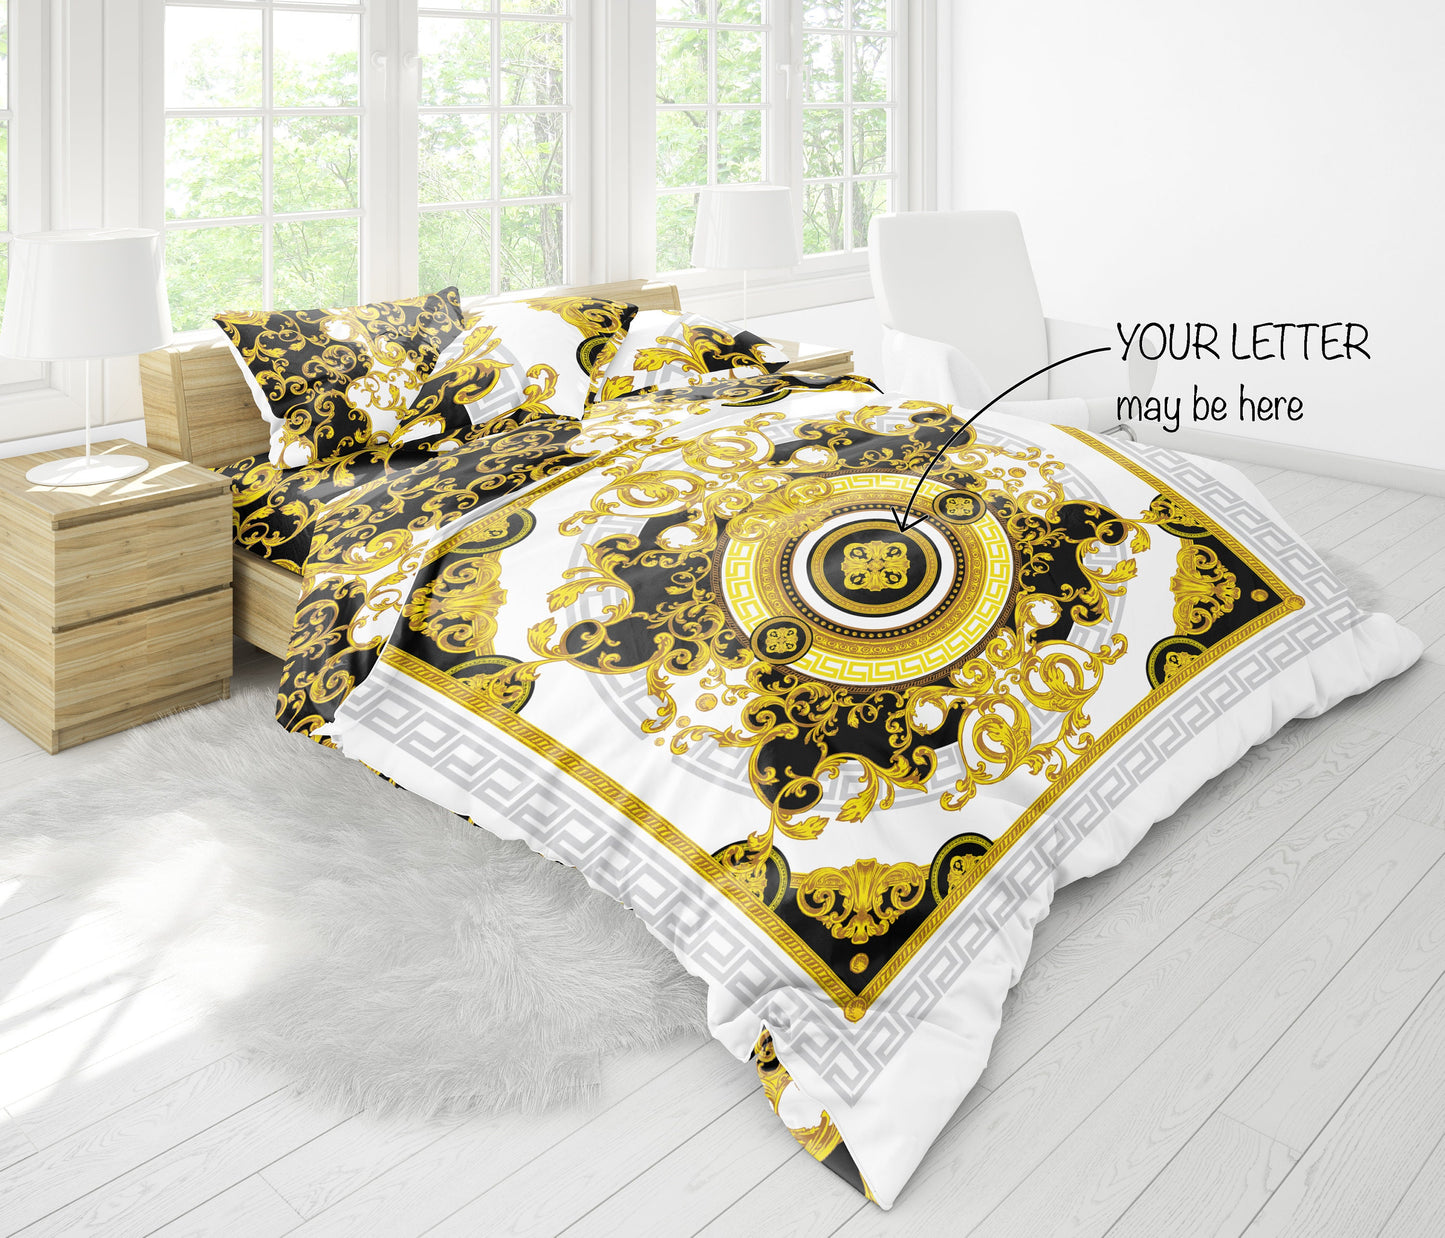 Baroque hand-drawing Personalised Romantic design 3PC Bedding set • 2 sided printed design • Cotton • microfiber • EU, USA, queen, king